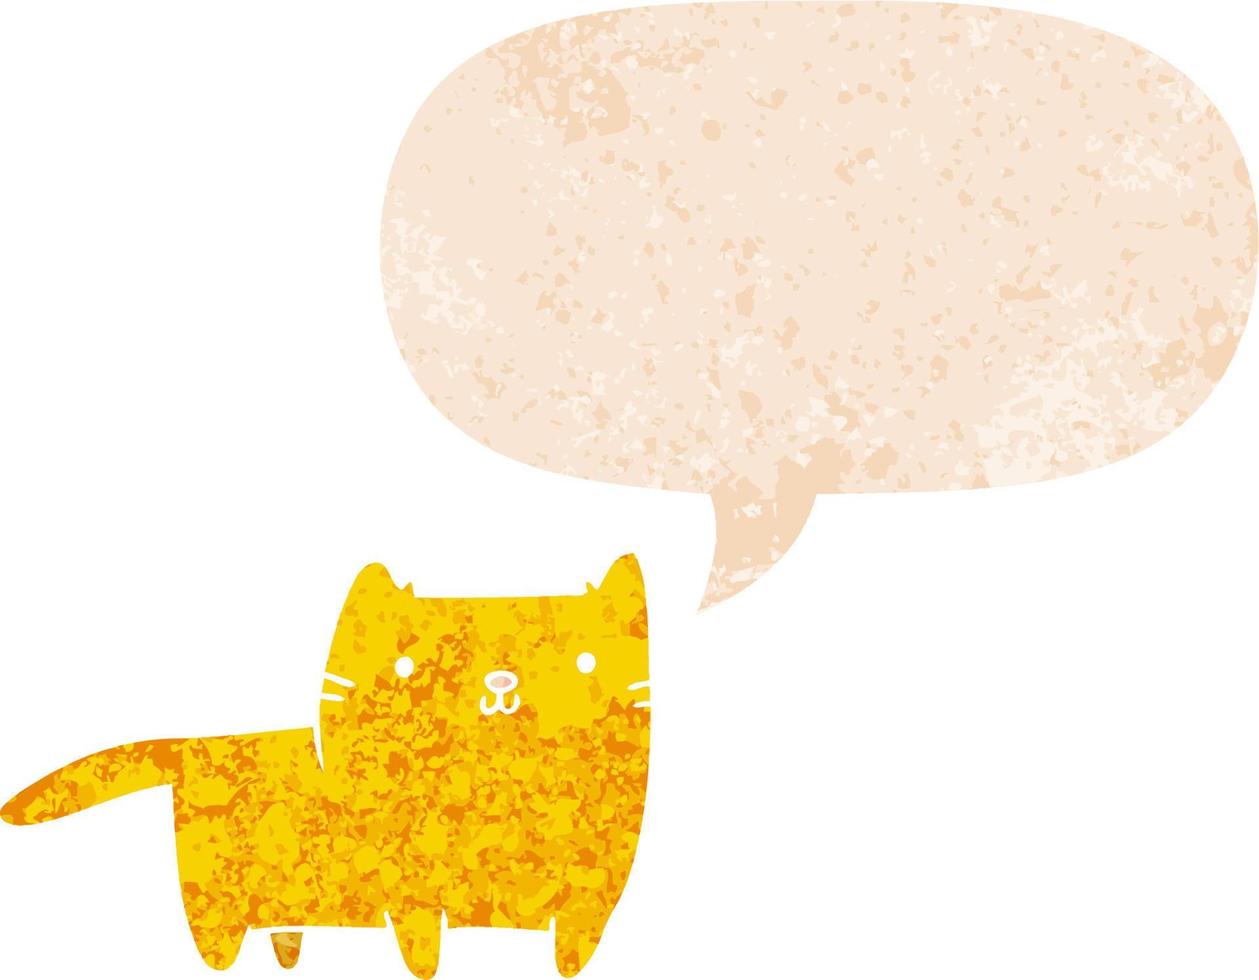 cartoon cat and speech bubble in retro textured style vector